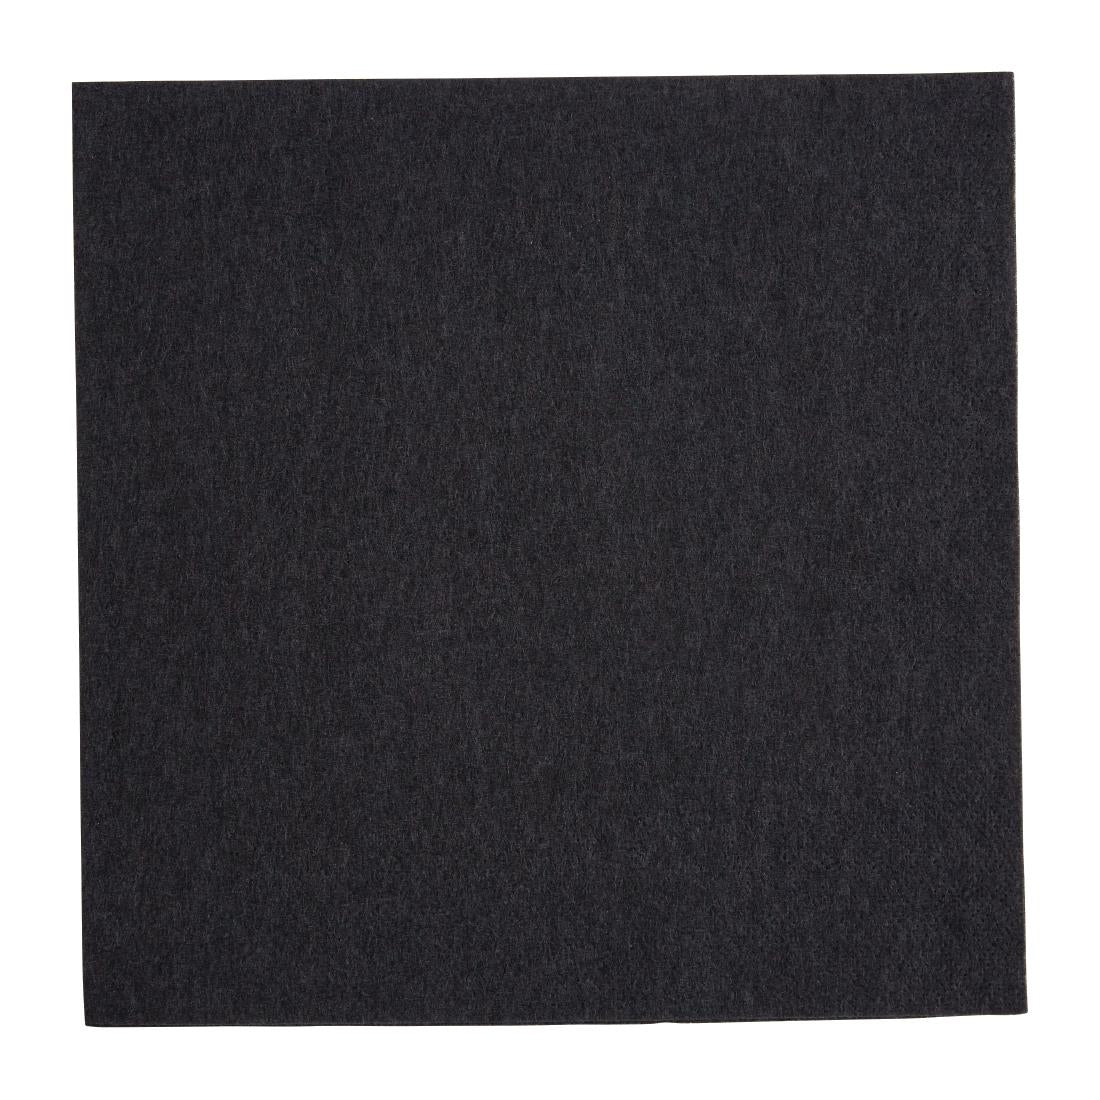 FE241 Fiesta Recyclable Dinner Napkin Black 40x40cm 2ply 1/4 Fold (Pack of 2000) JD Catering Equipment Solutions Ltd